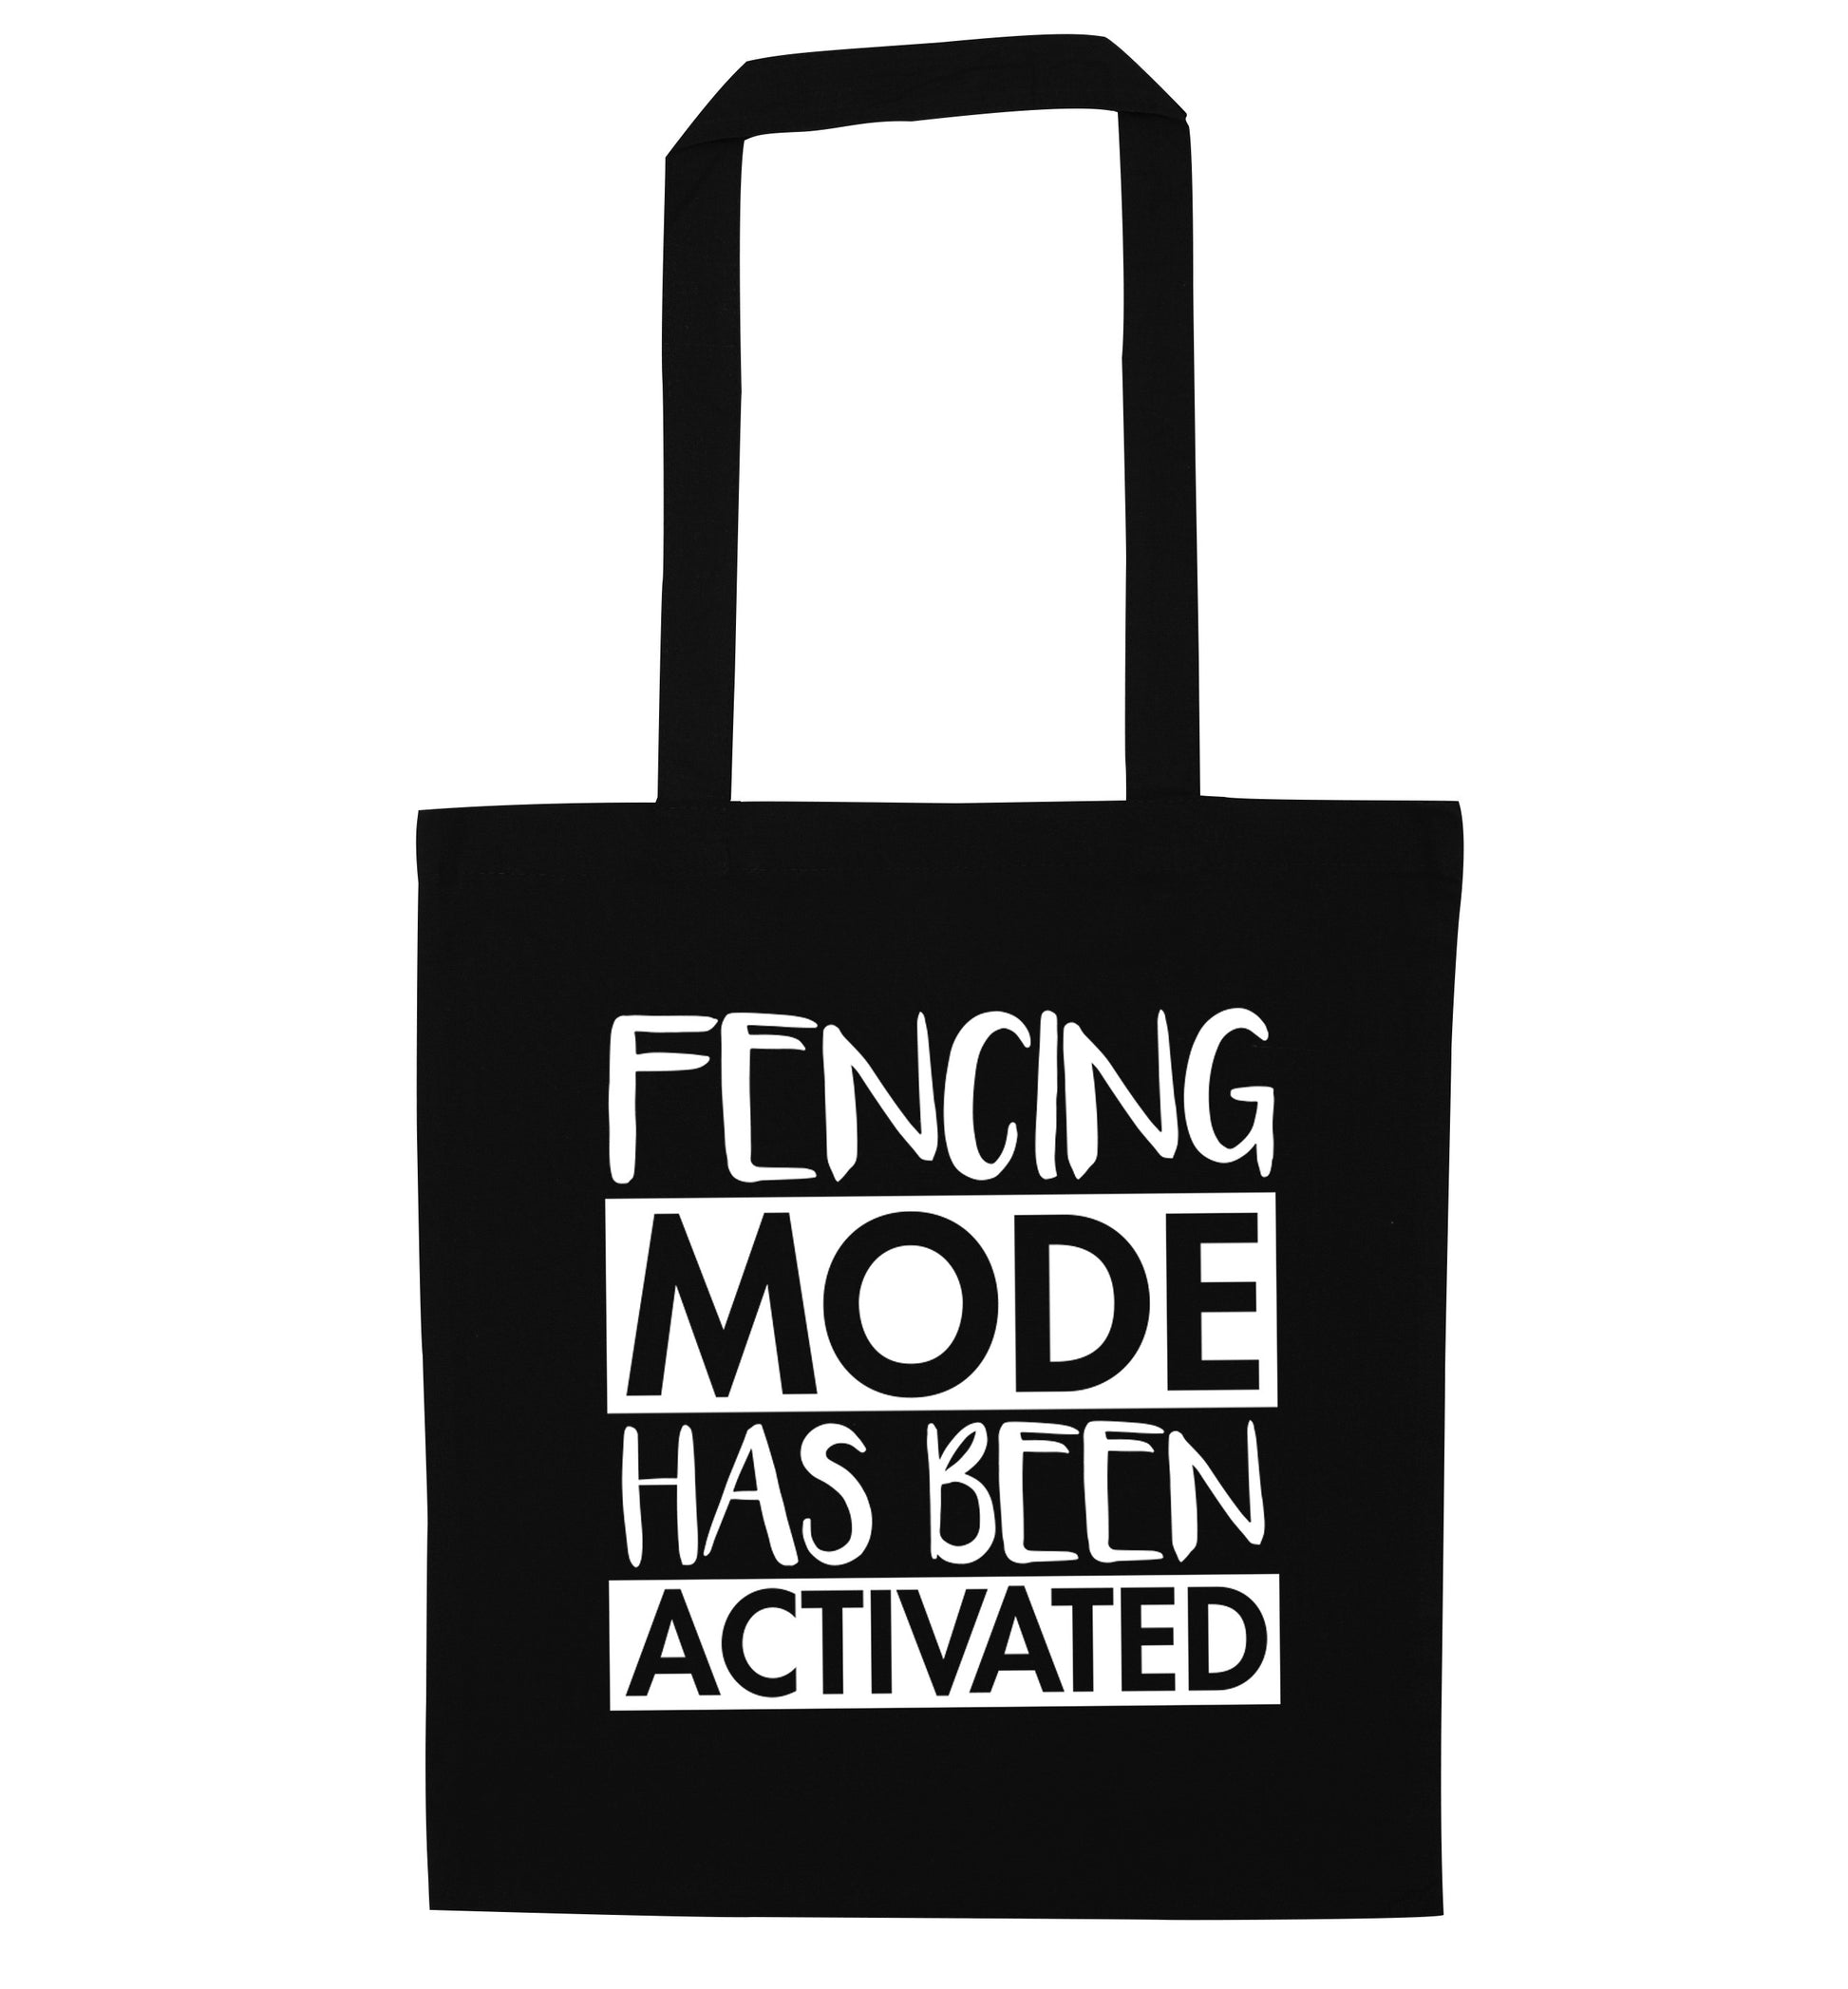 Fencing mode activated black tote bag